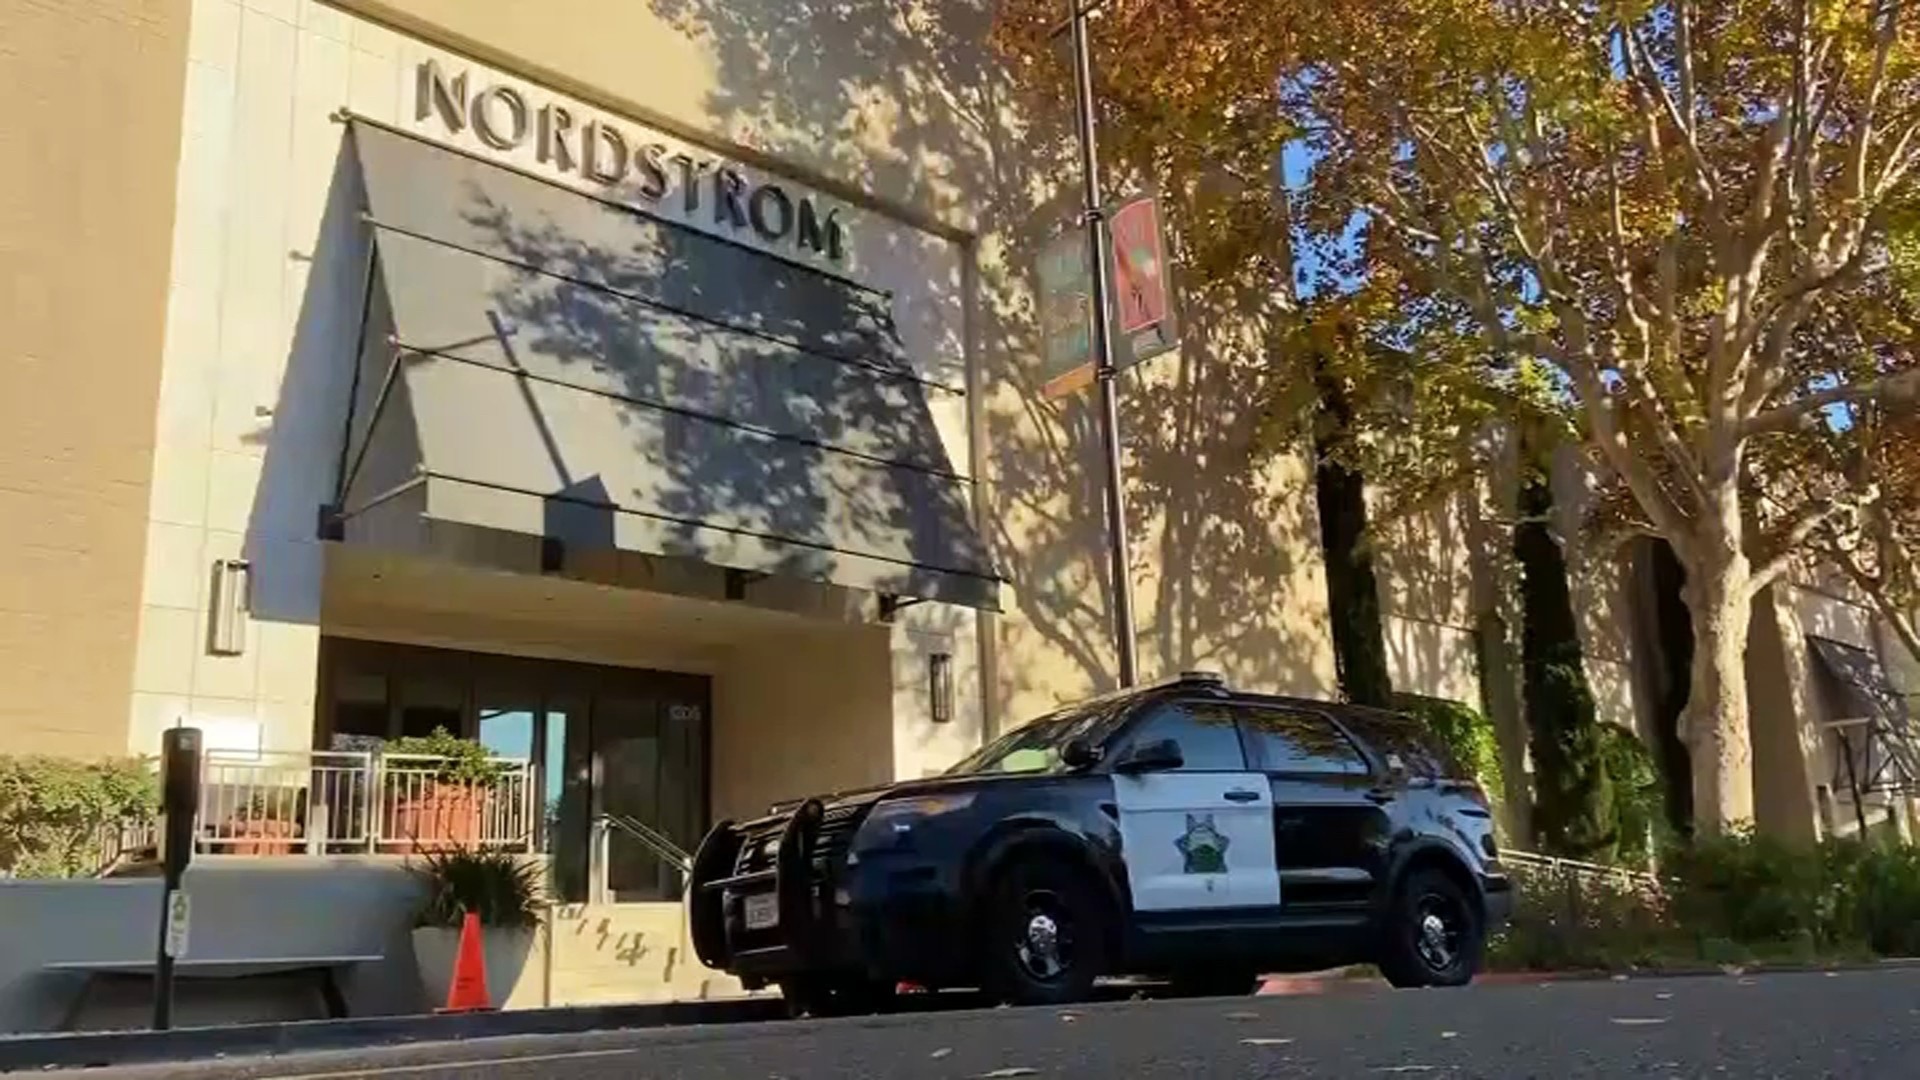 Walnut Creek to Spend $2M in Response to Nordstrom Robbery – NBC